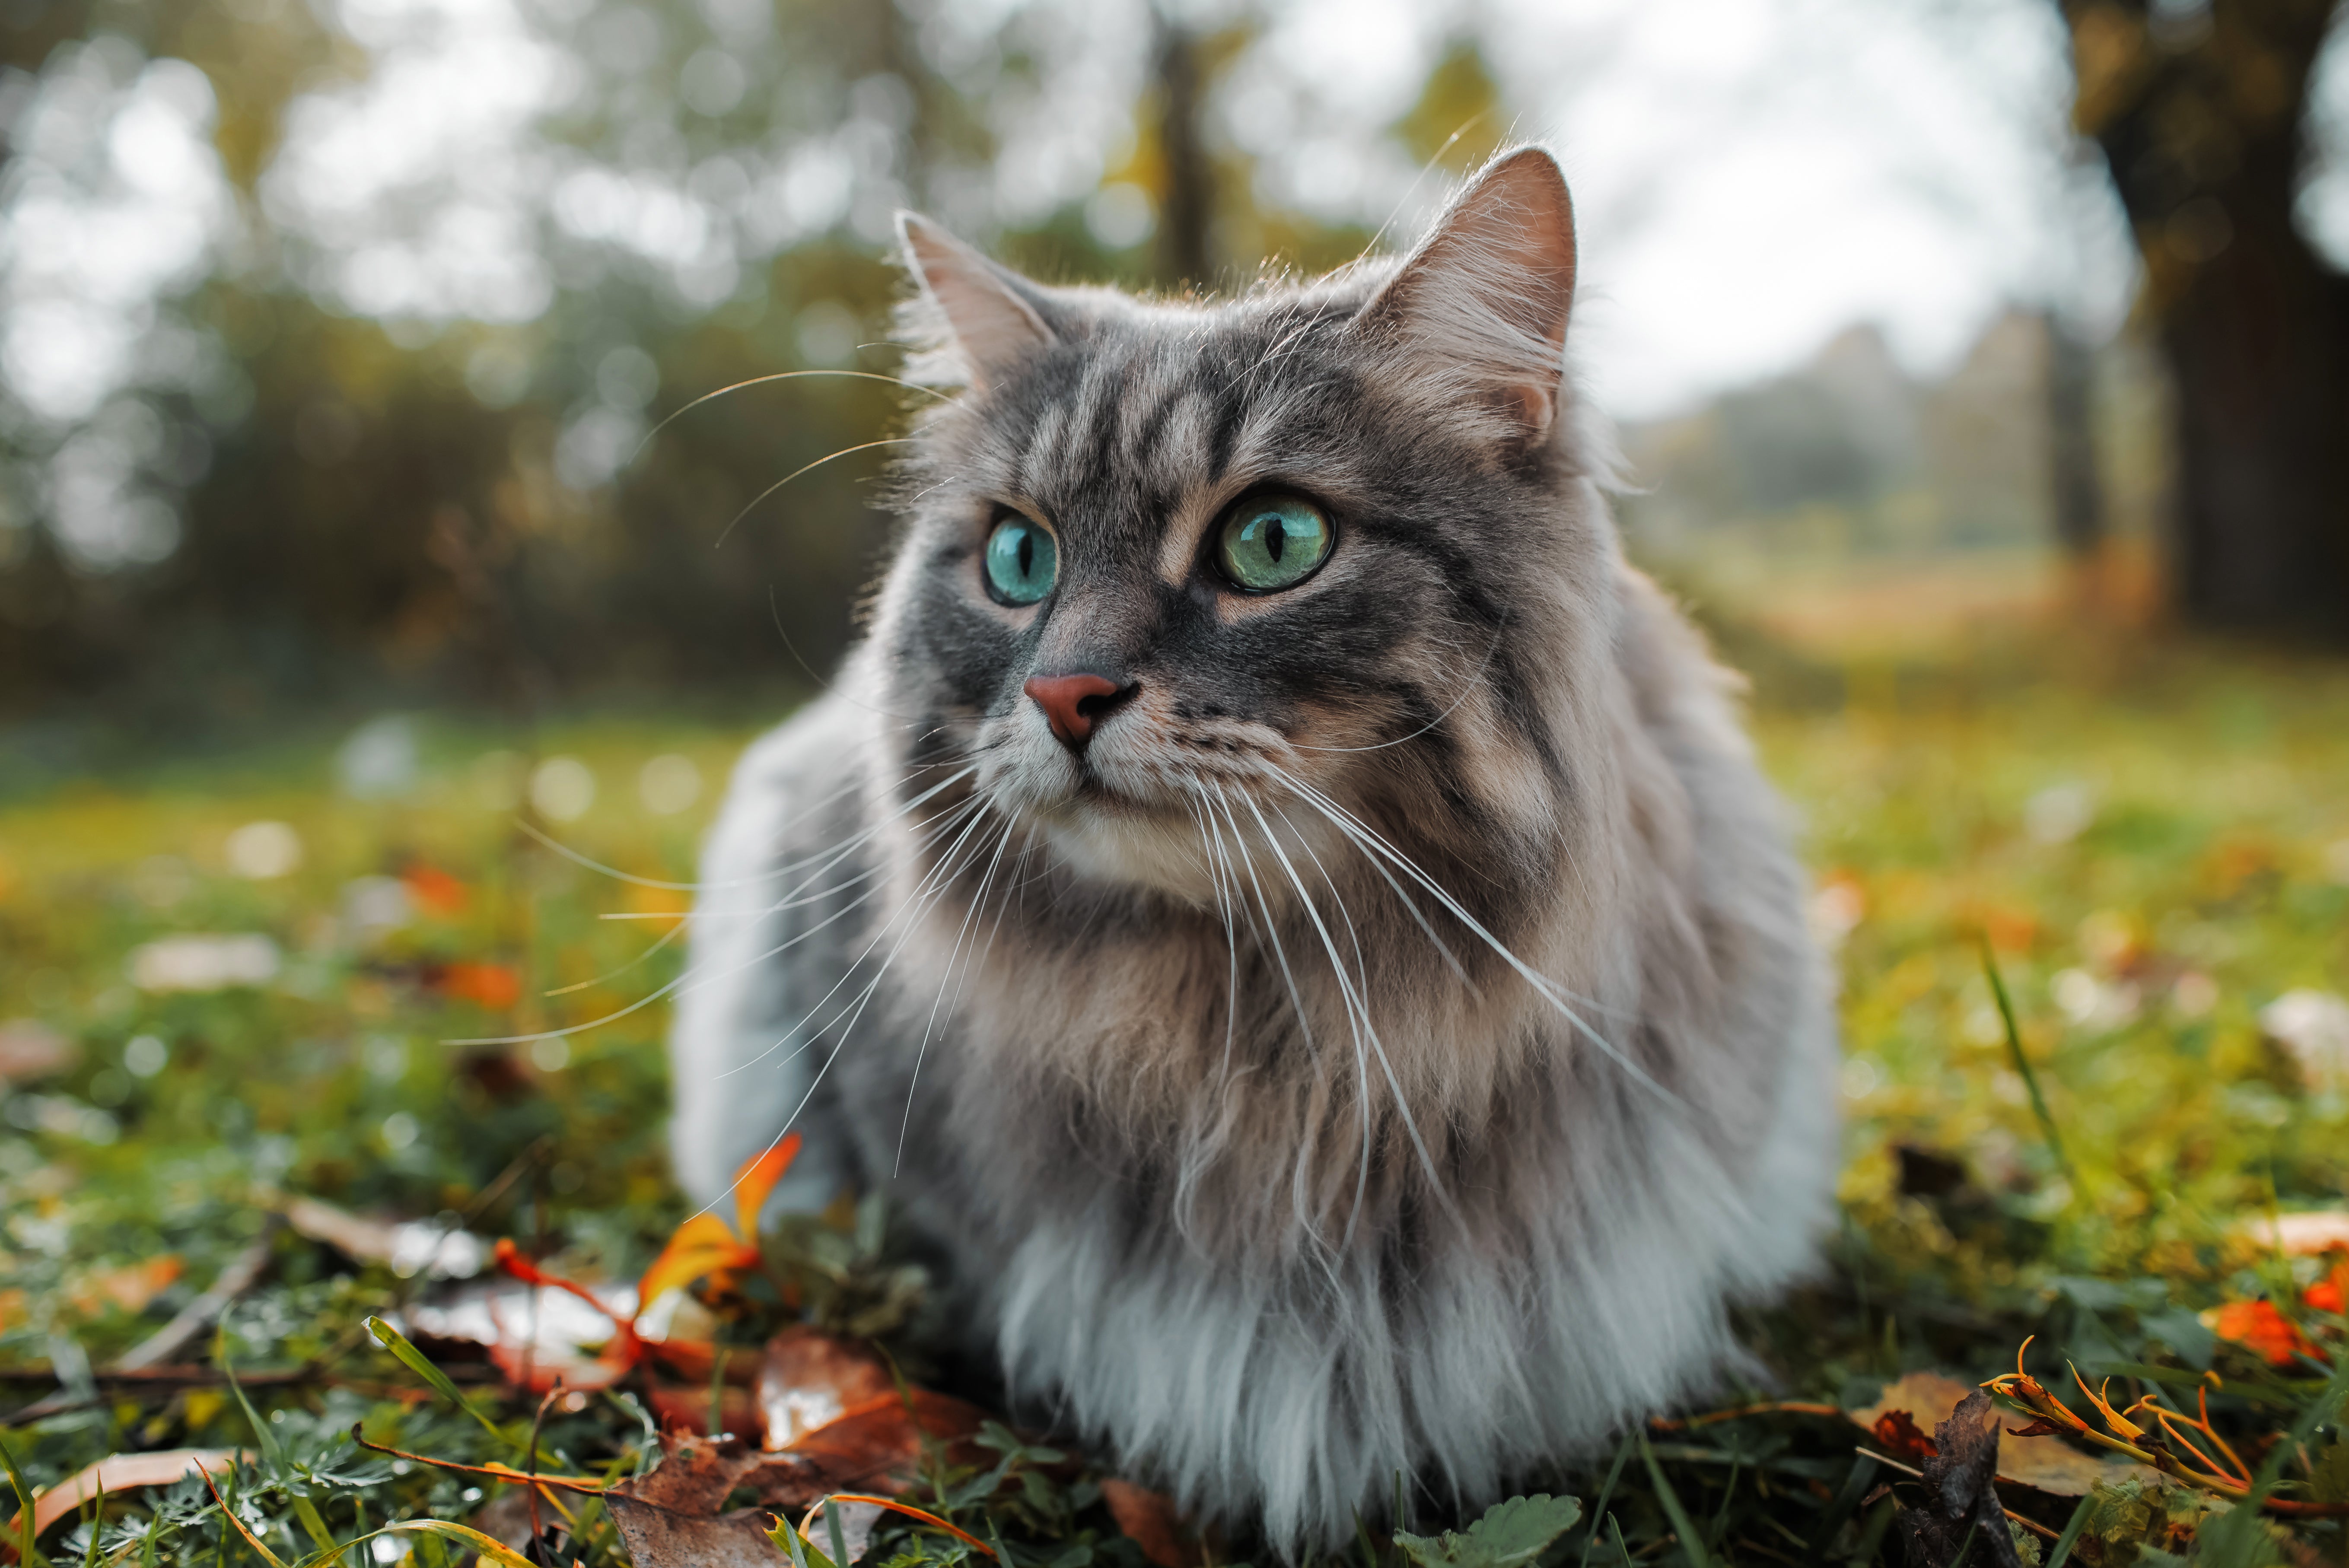 Majestic cat sitting outdoors